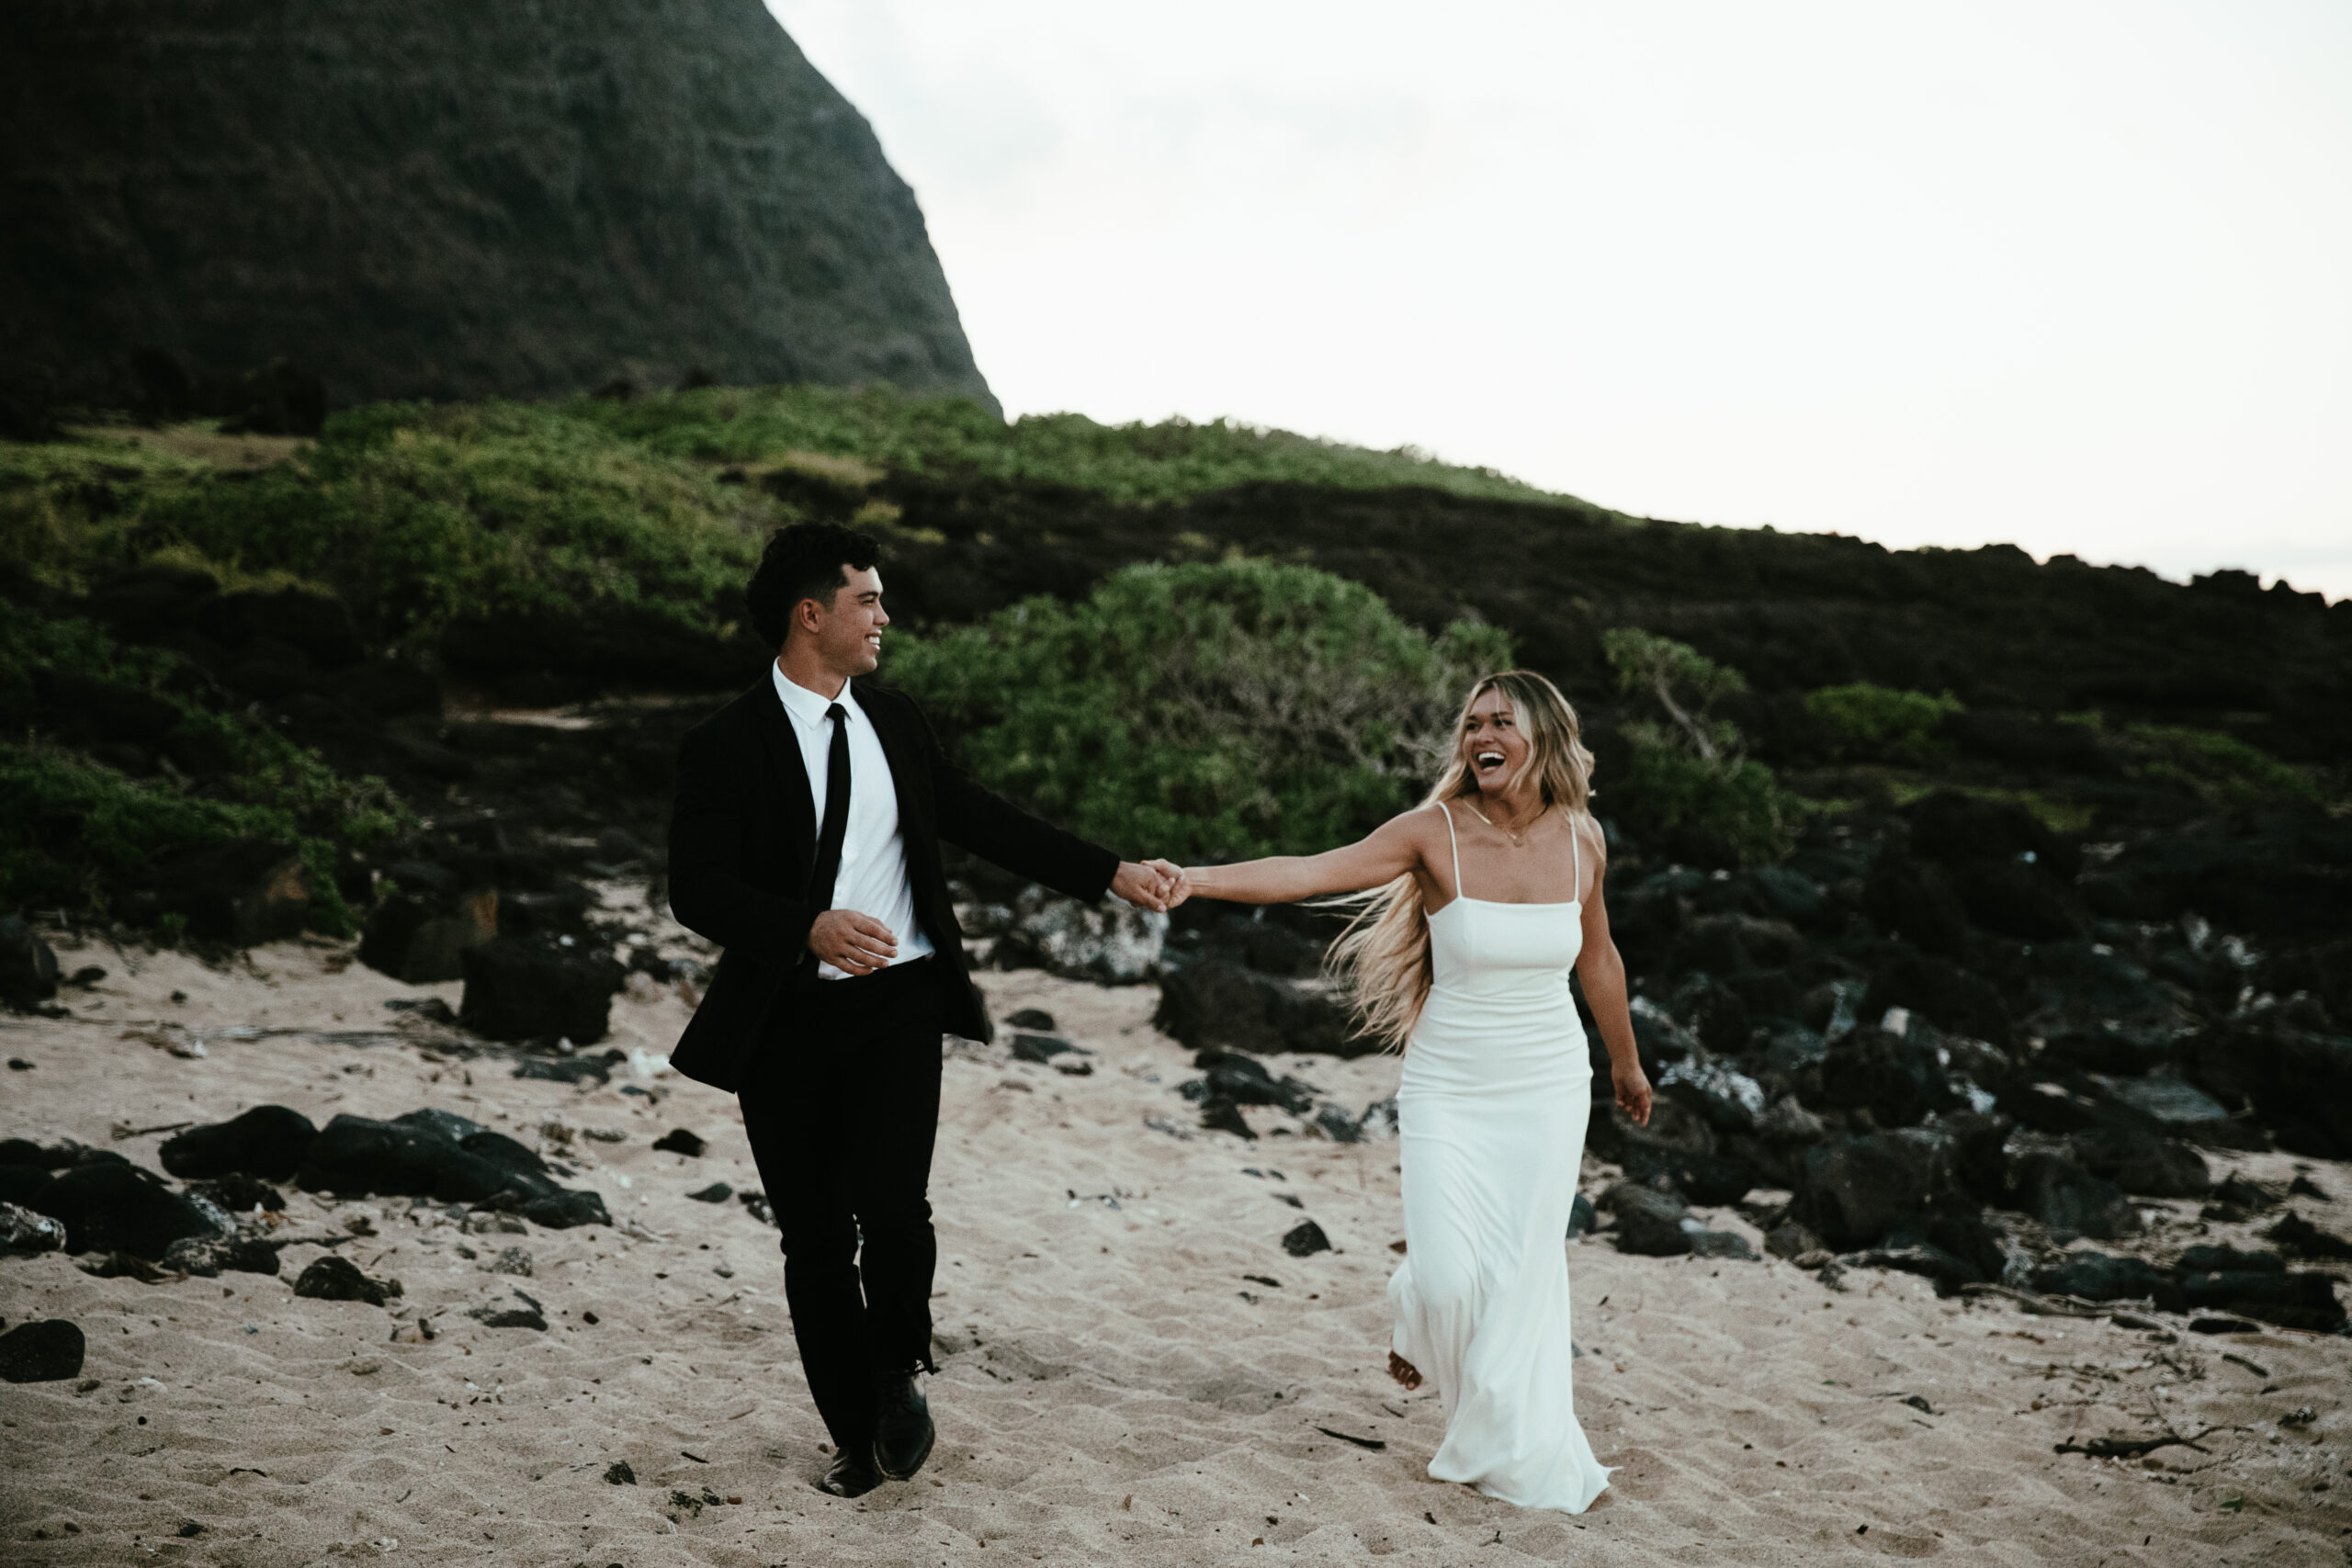 A couple eloping on a beach in Oahu, Hawaii